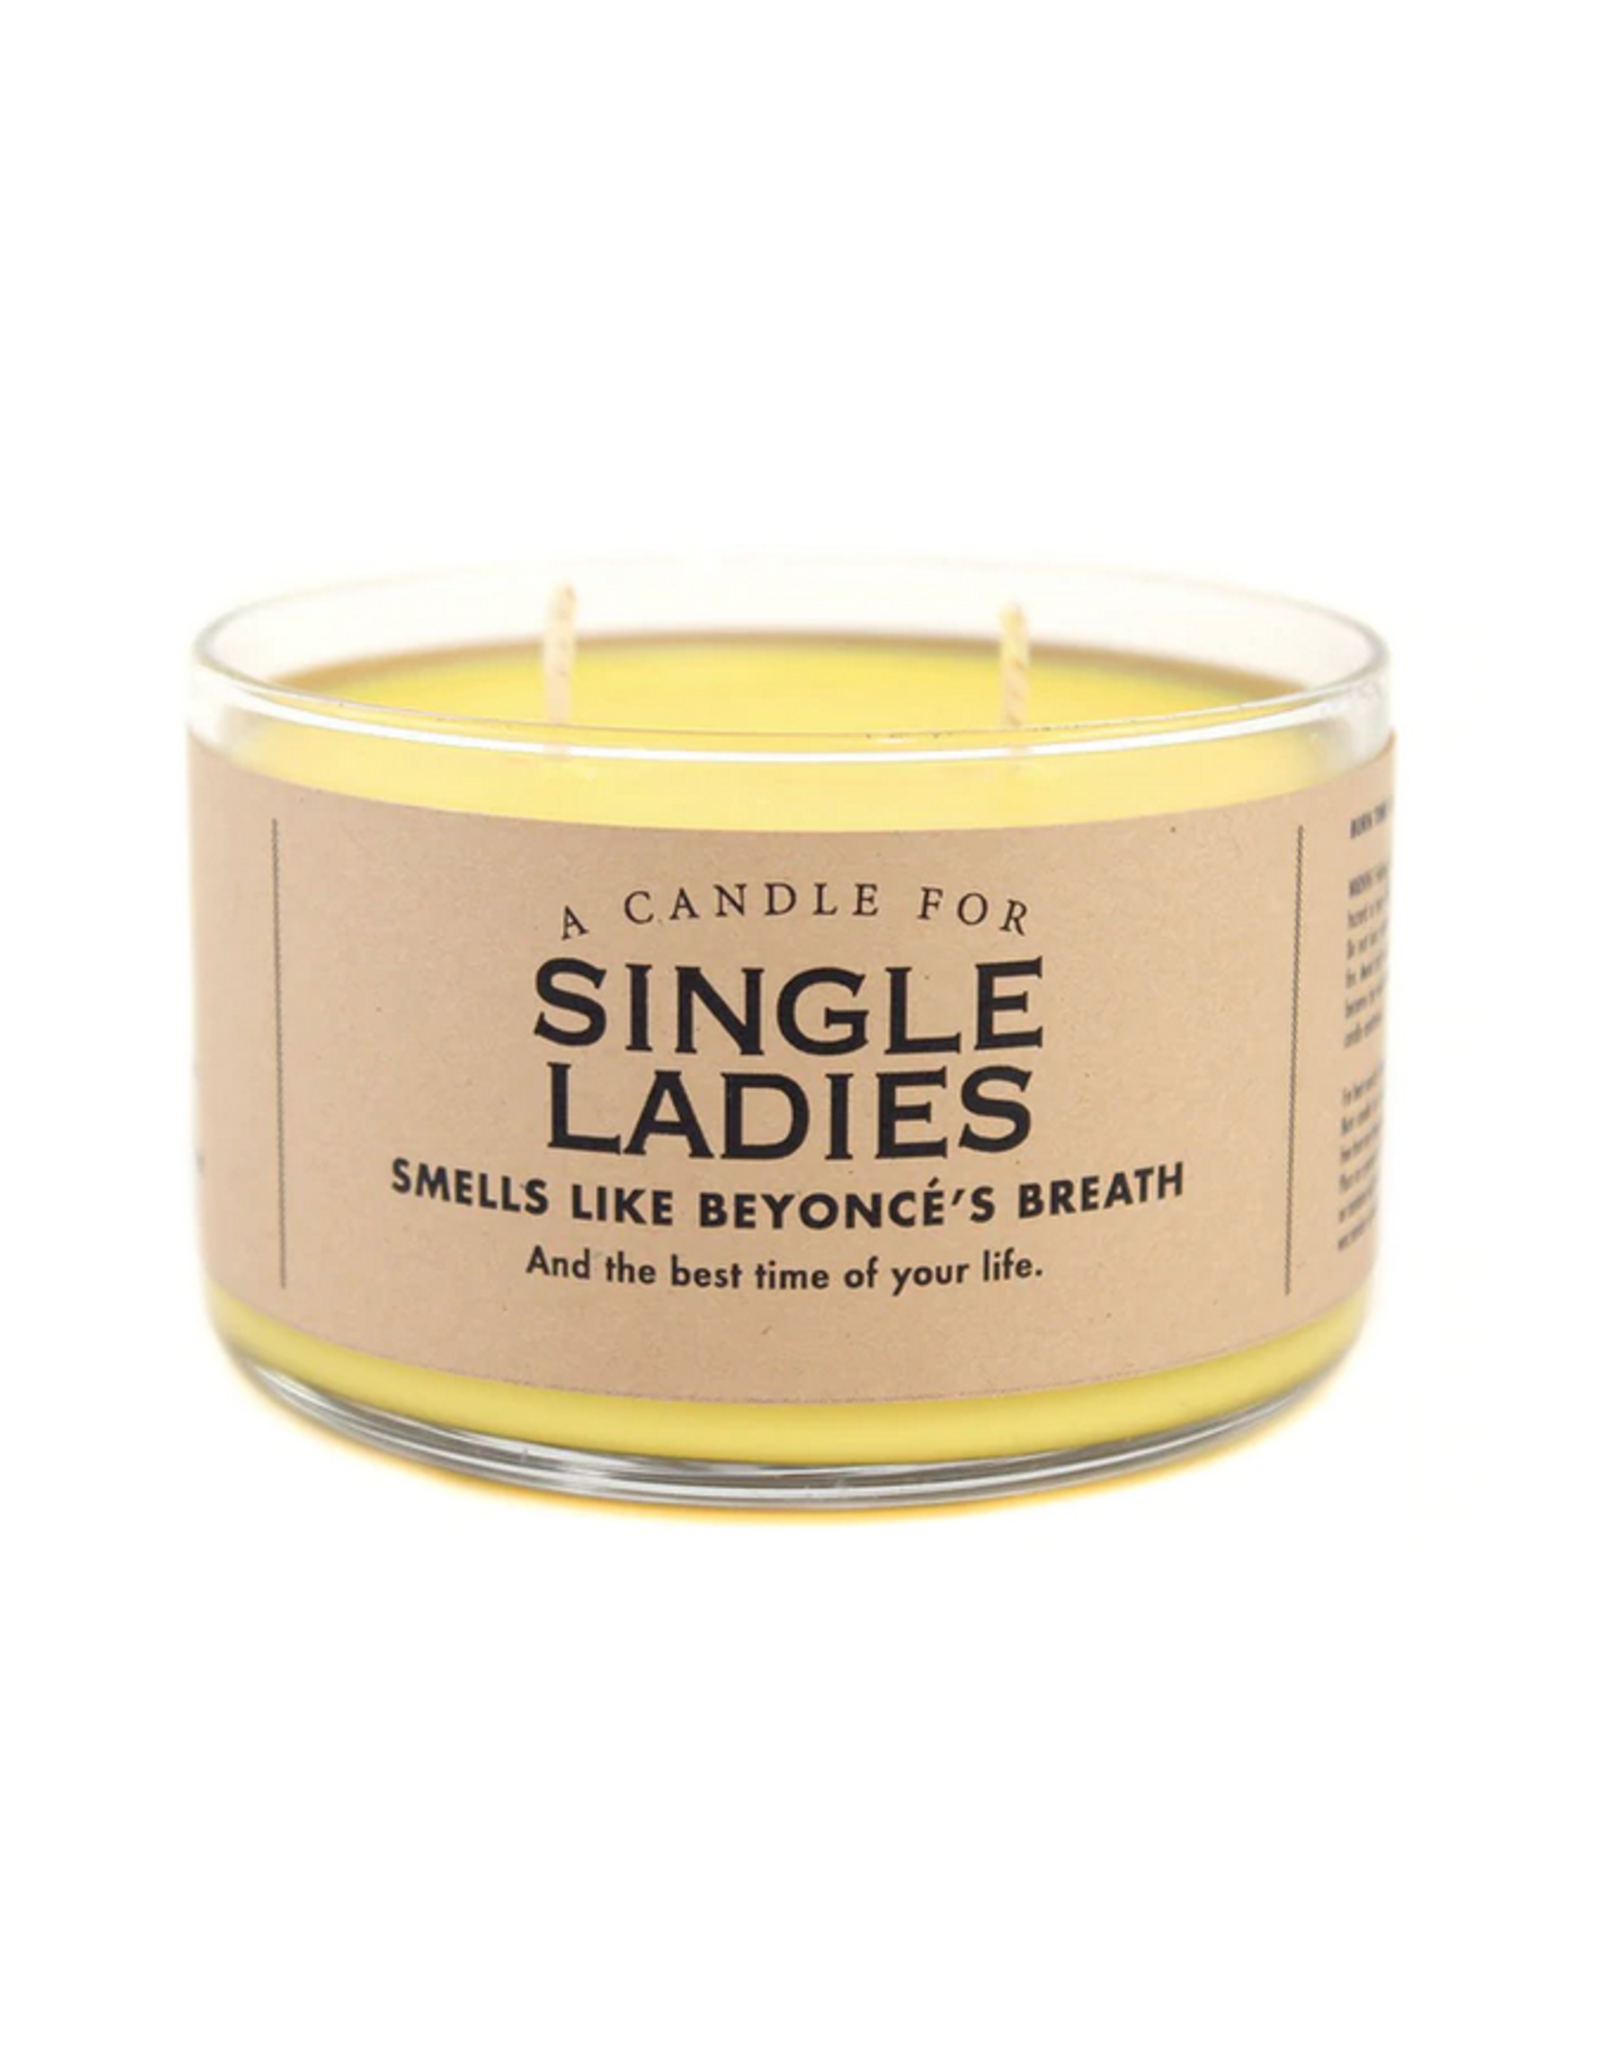 A Candle for Single Ladies